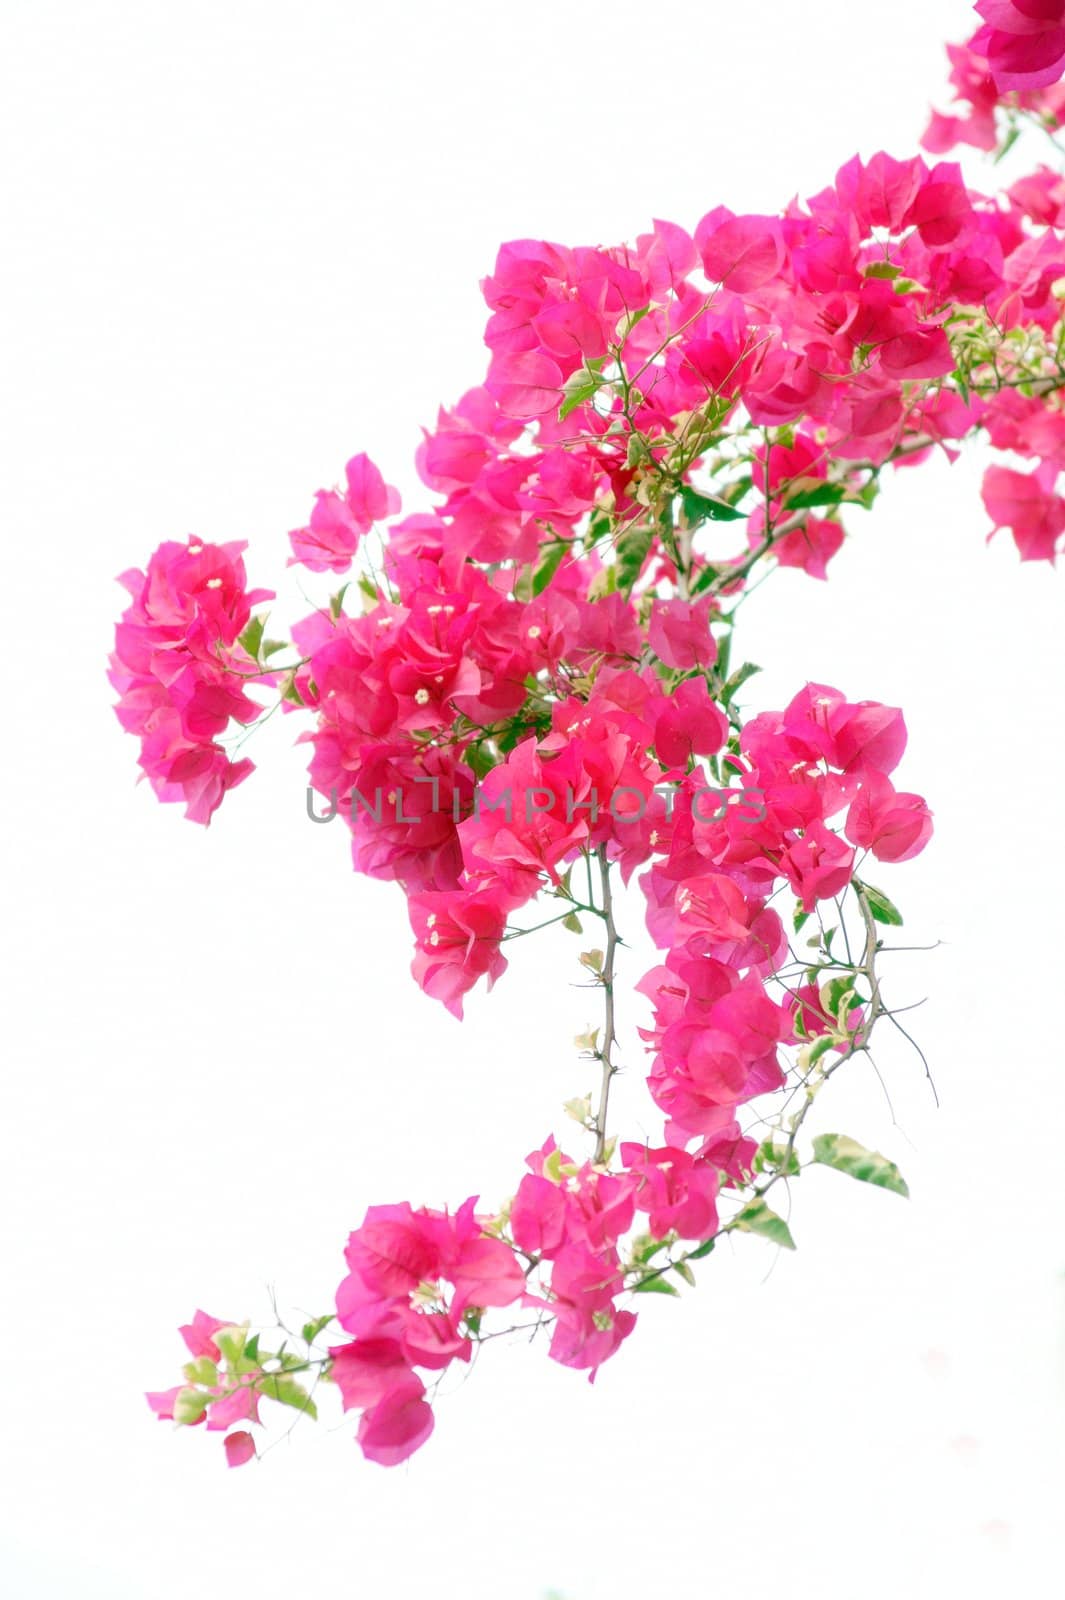 Island bougainvillea flowers isolated on white background - Taken in China's Hainan